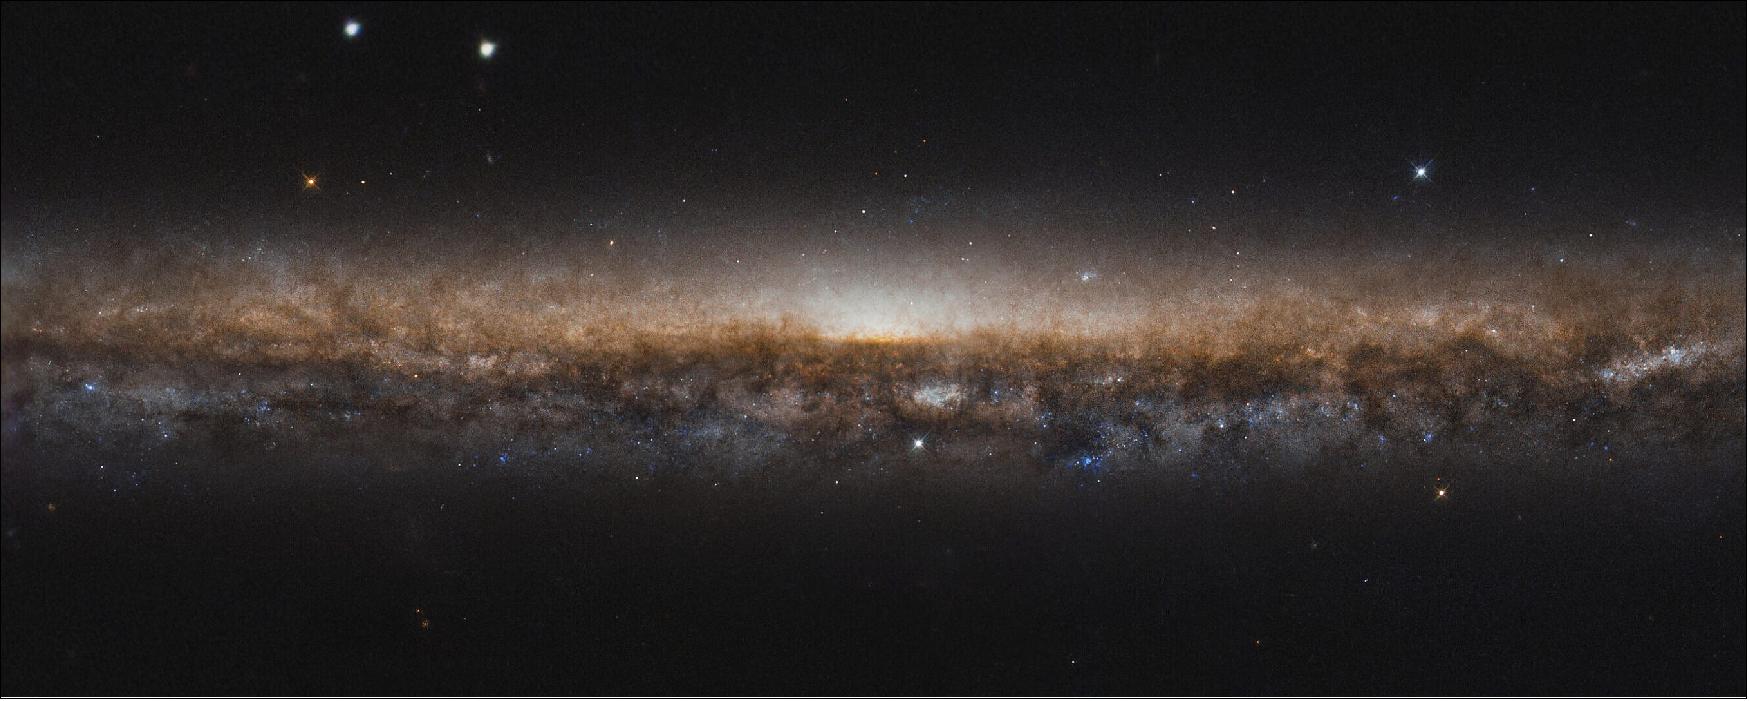 Figure 52: The Knife Edge Galaxy is about 50 million light-years from Earth, lying in the northern constellation of Draco. Although not visible in this image, ghostly streams of stars on large arching loops extend into space, circling around the galaxy; they are believed to be remnants of a small dwarf galaxy, torn apart by the Knife Edge Galaxy and merged with it over four billion years ago [image credit: ESA/Hubble & NASA, R. de Jong; CC BY 4.0; Acknowledgement: Judy Schmidt (Geckzilla)]